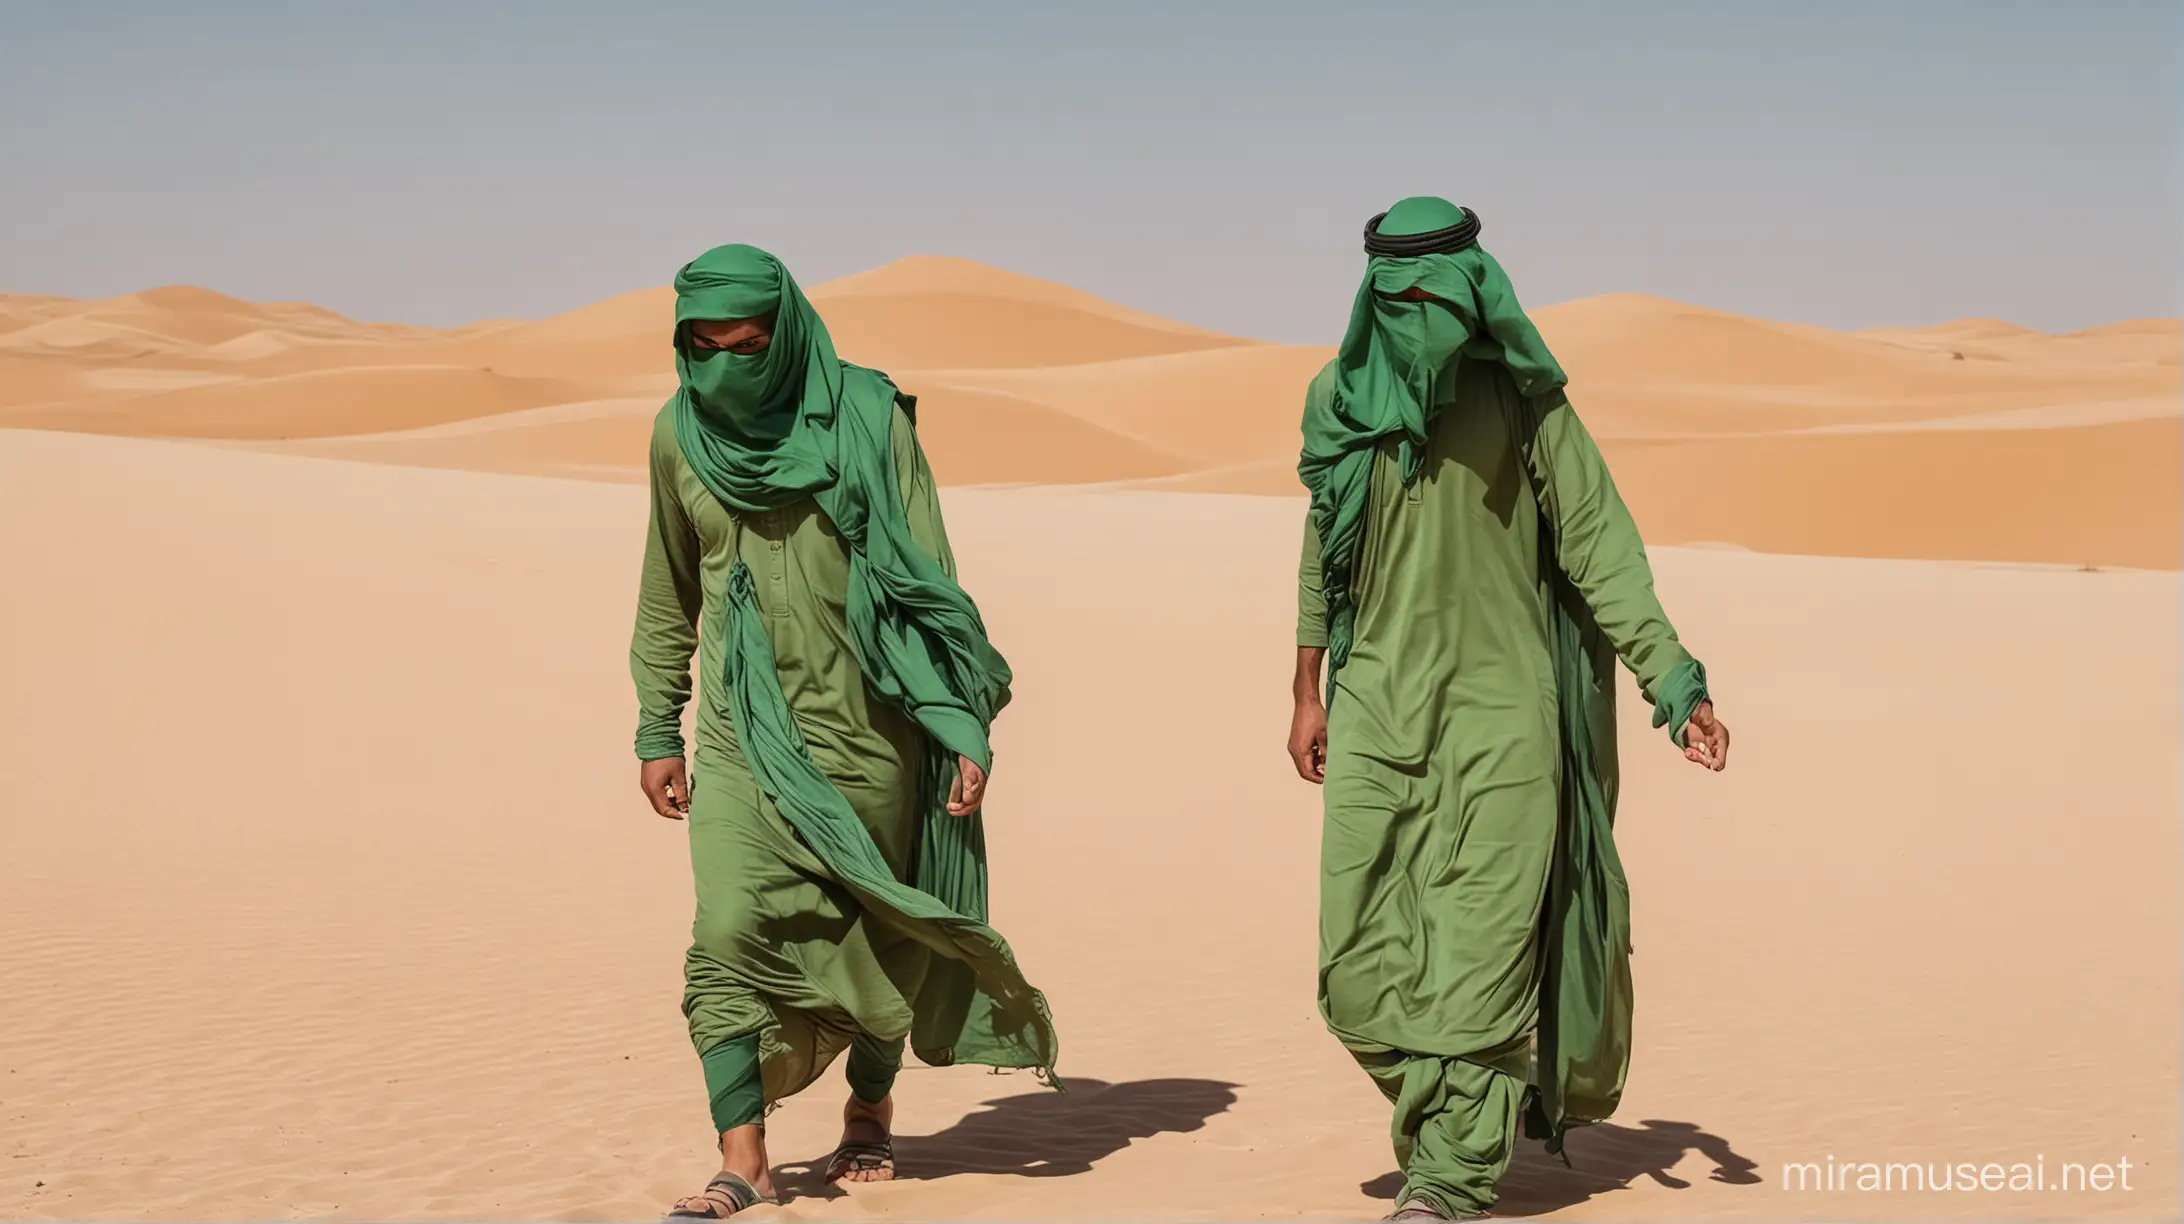 Two Arab Men Travelling in the Desert Traditional Clothing and